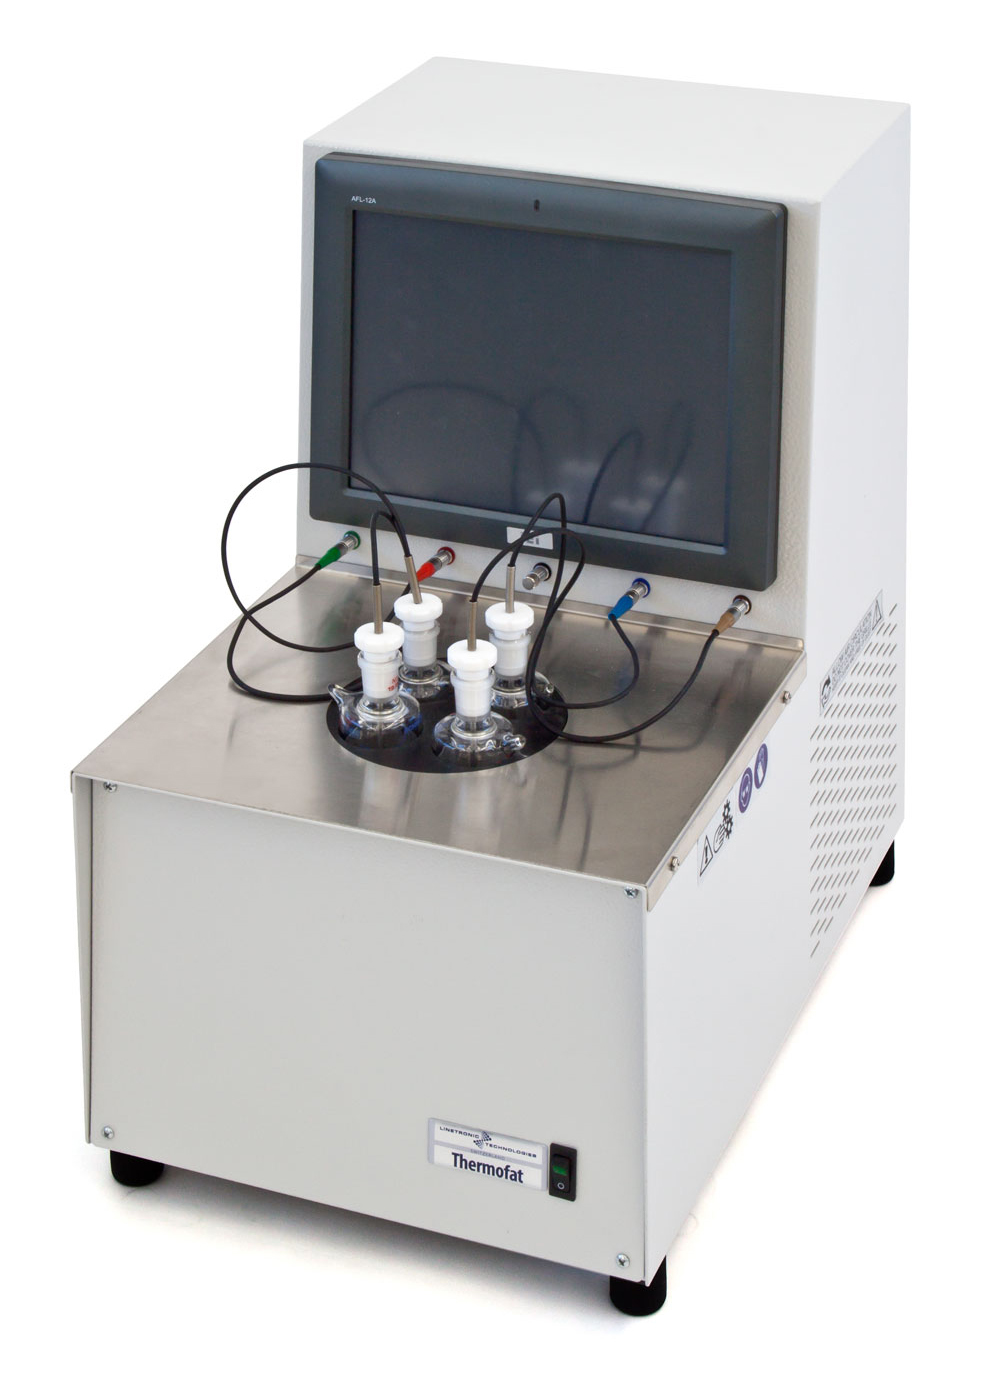 Thermo Four: Thermofat Analyser, Shukoff and Tempering Applications